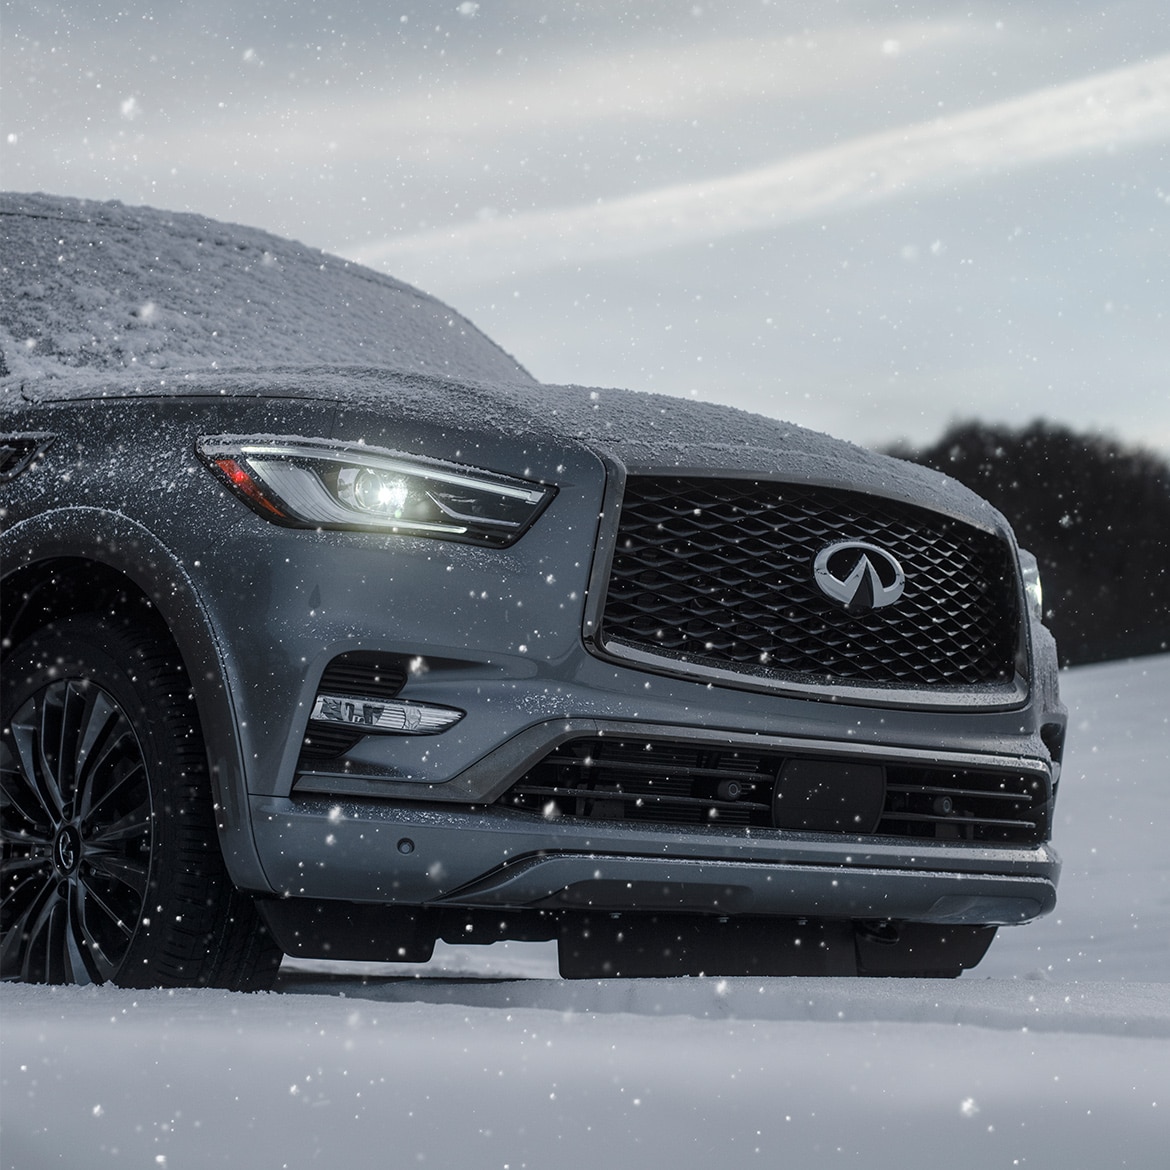 Front grille on an INFINITI SUV in snow showing off the logo badge